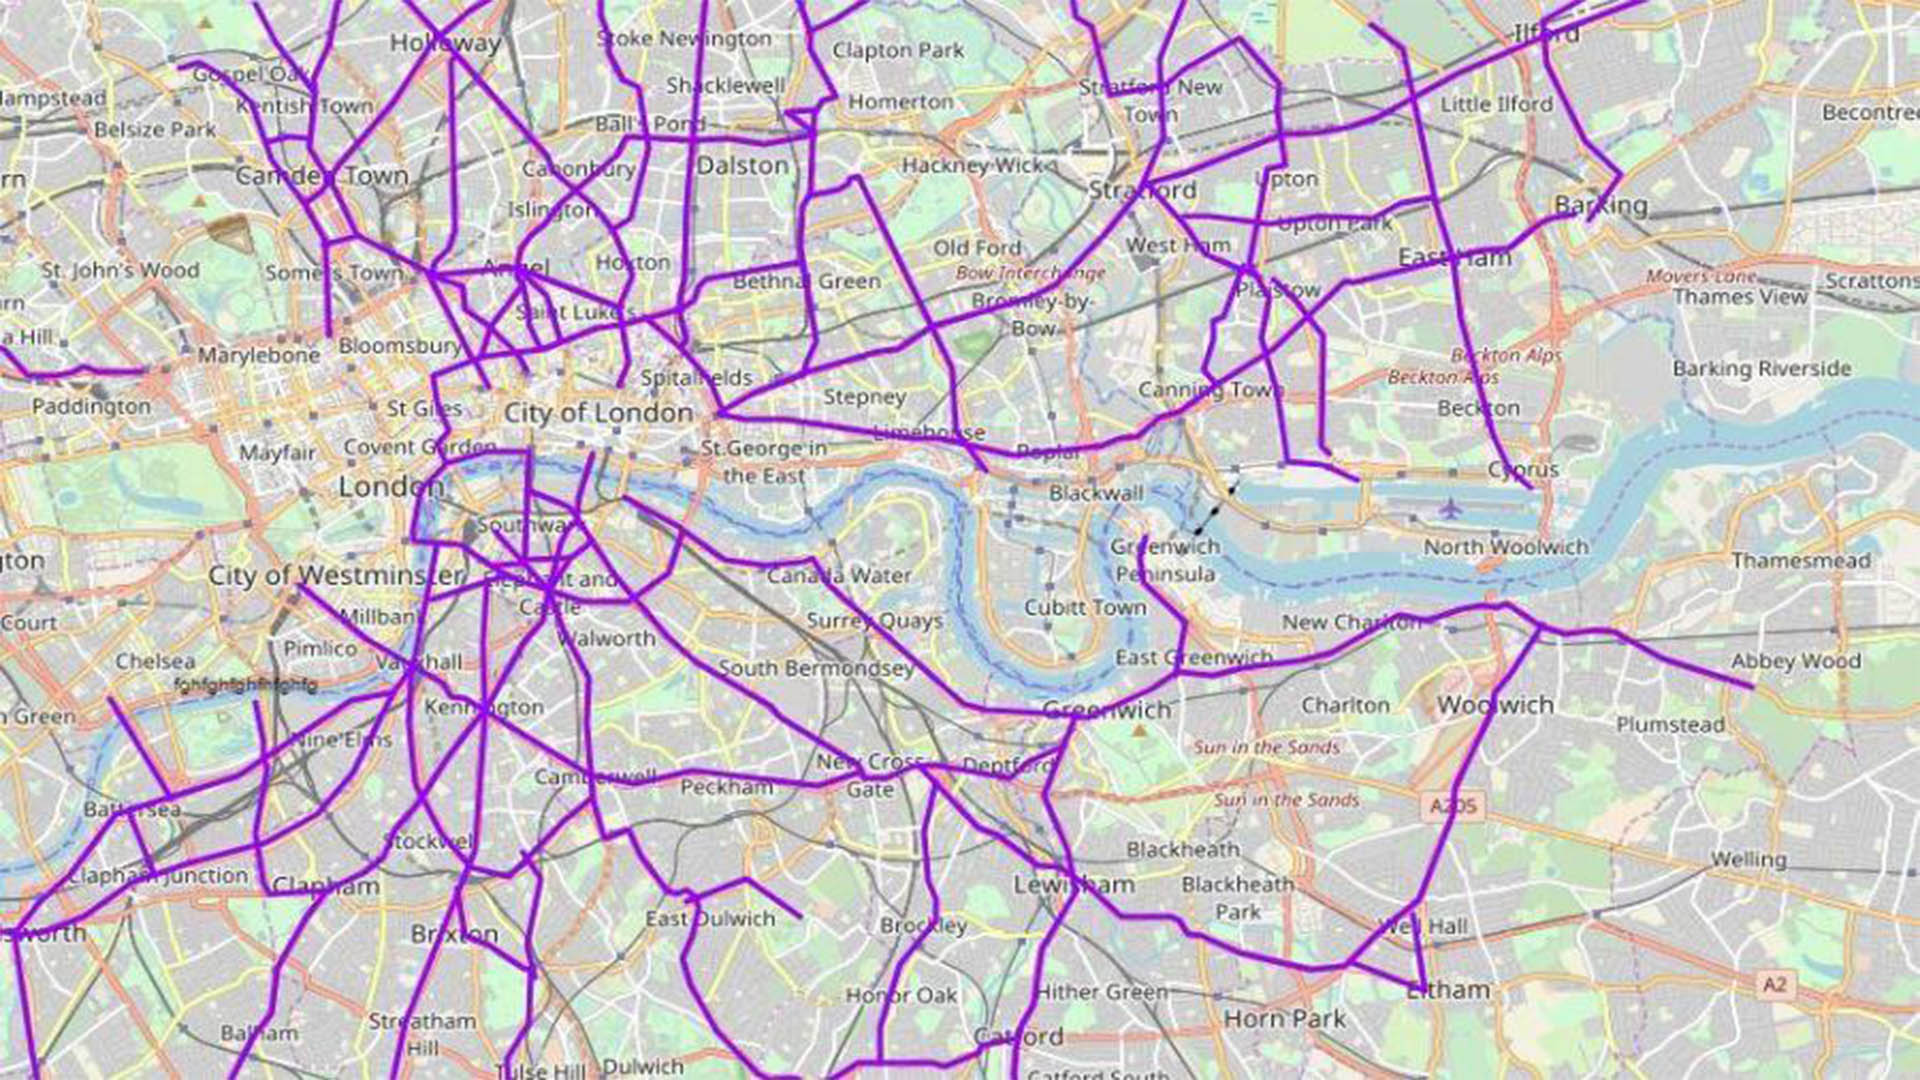 Fascinating 19th Century London tram map shows Victorian Routes Around